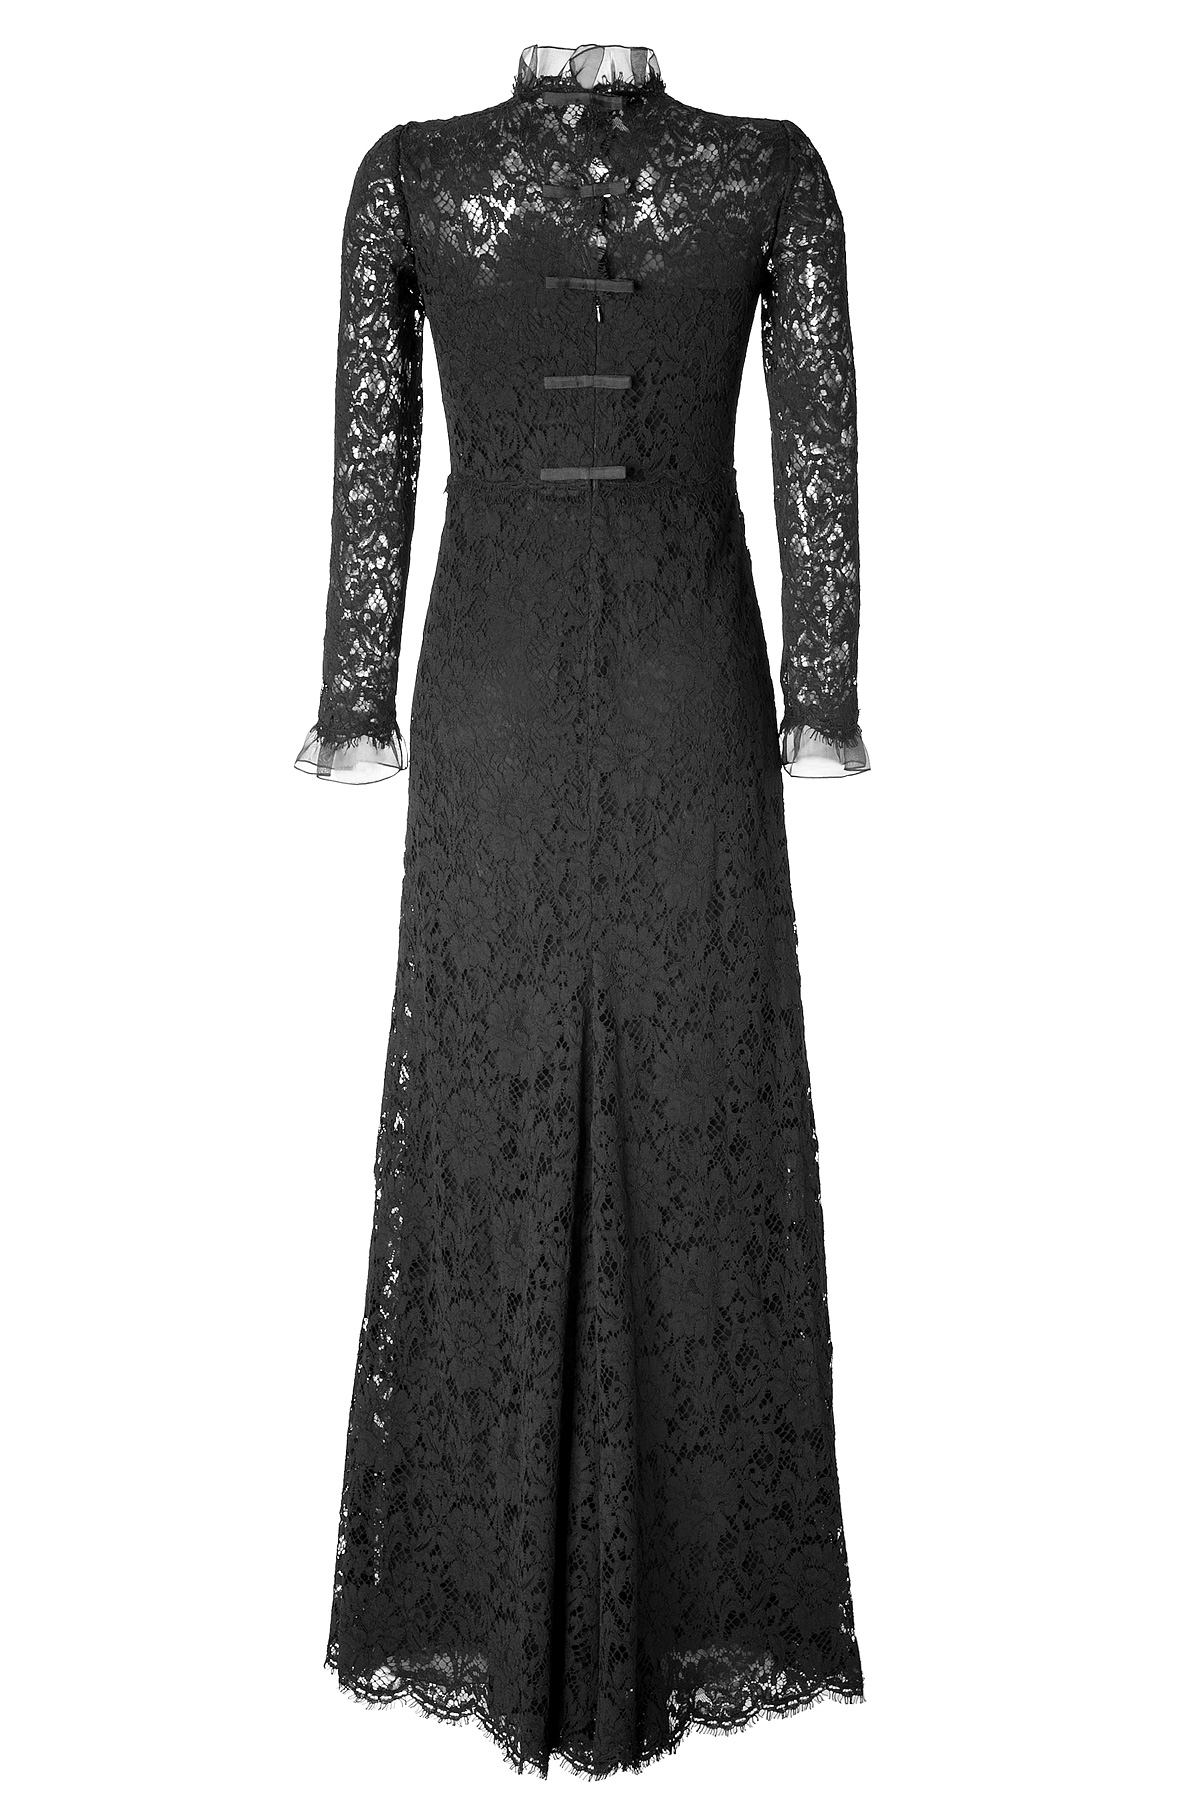 Lyst - Valentino Lace Long Sleeve Evening Gown in Black